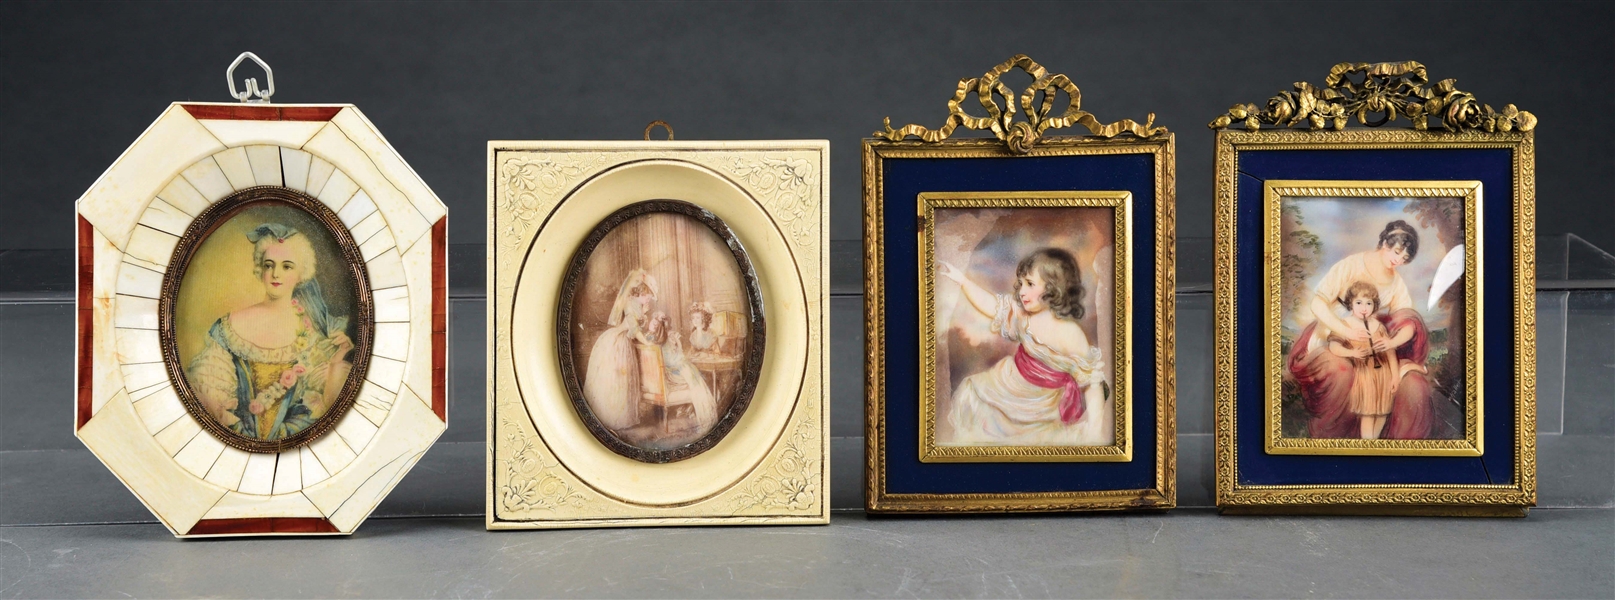 LOT OF 4: HAND-PAINTED ANTIQUE MINIATURE PORTRAITS ON IVORY.